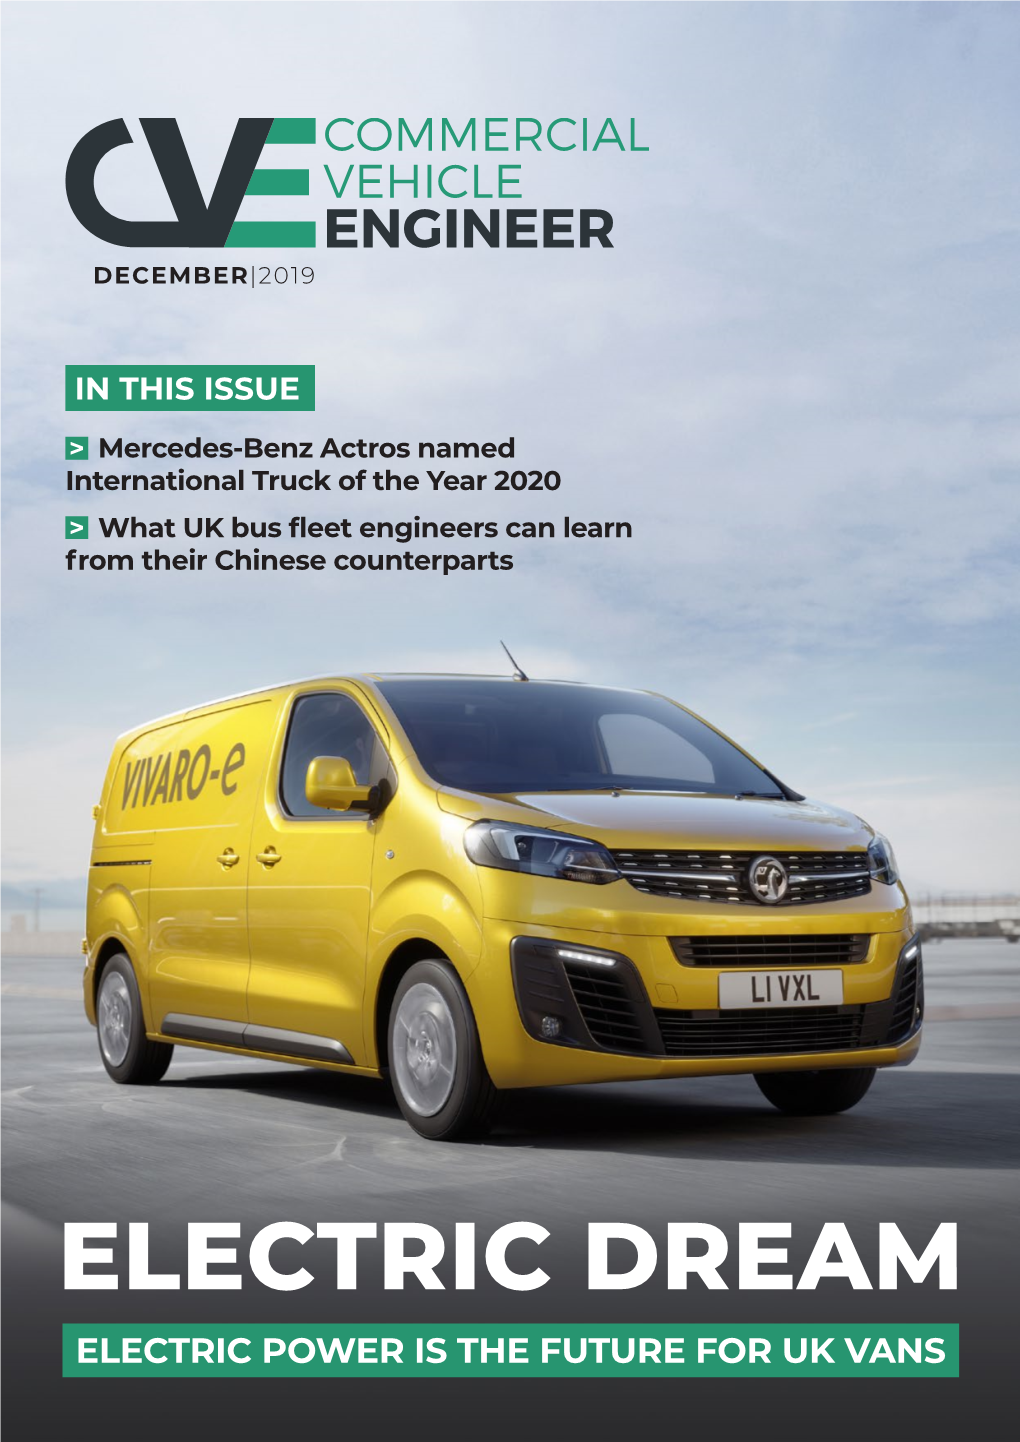 Electric Dream Electric Power Is the Future for Uk Vans